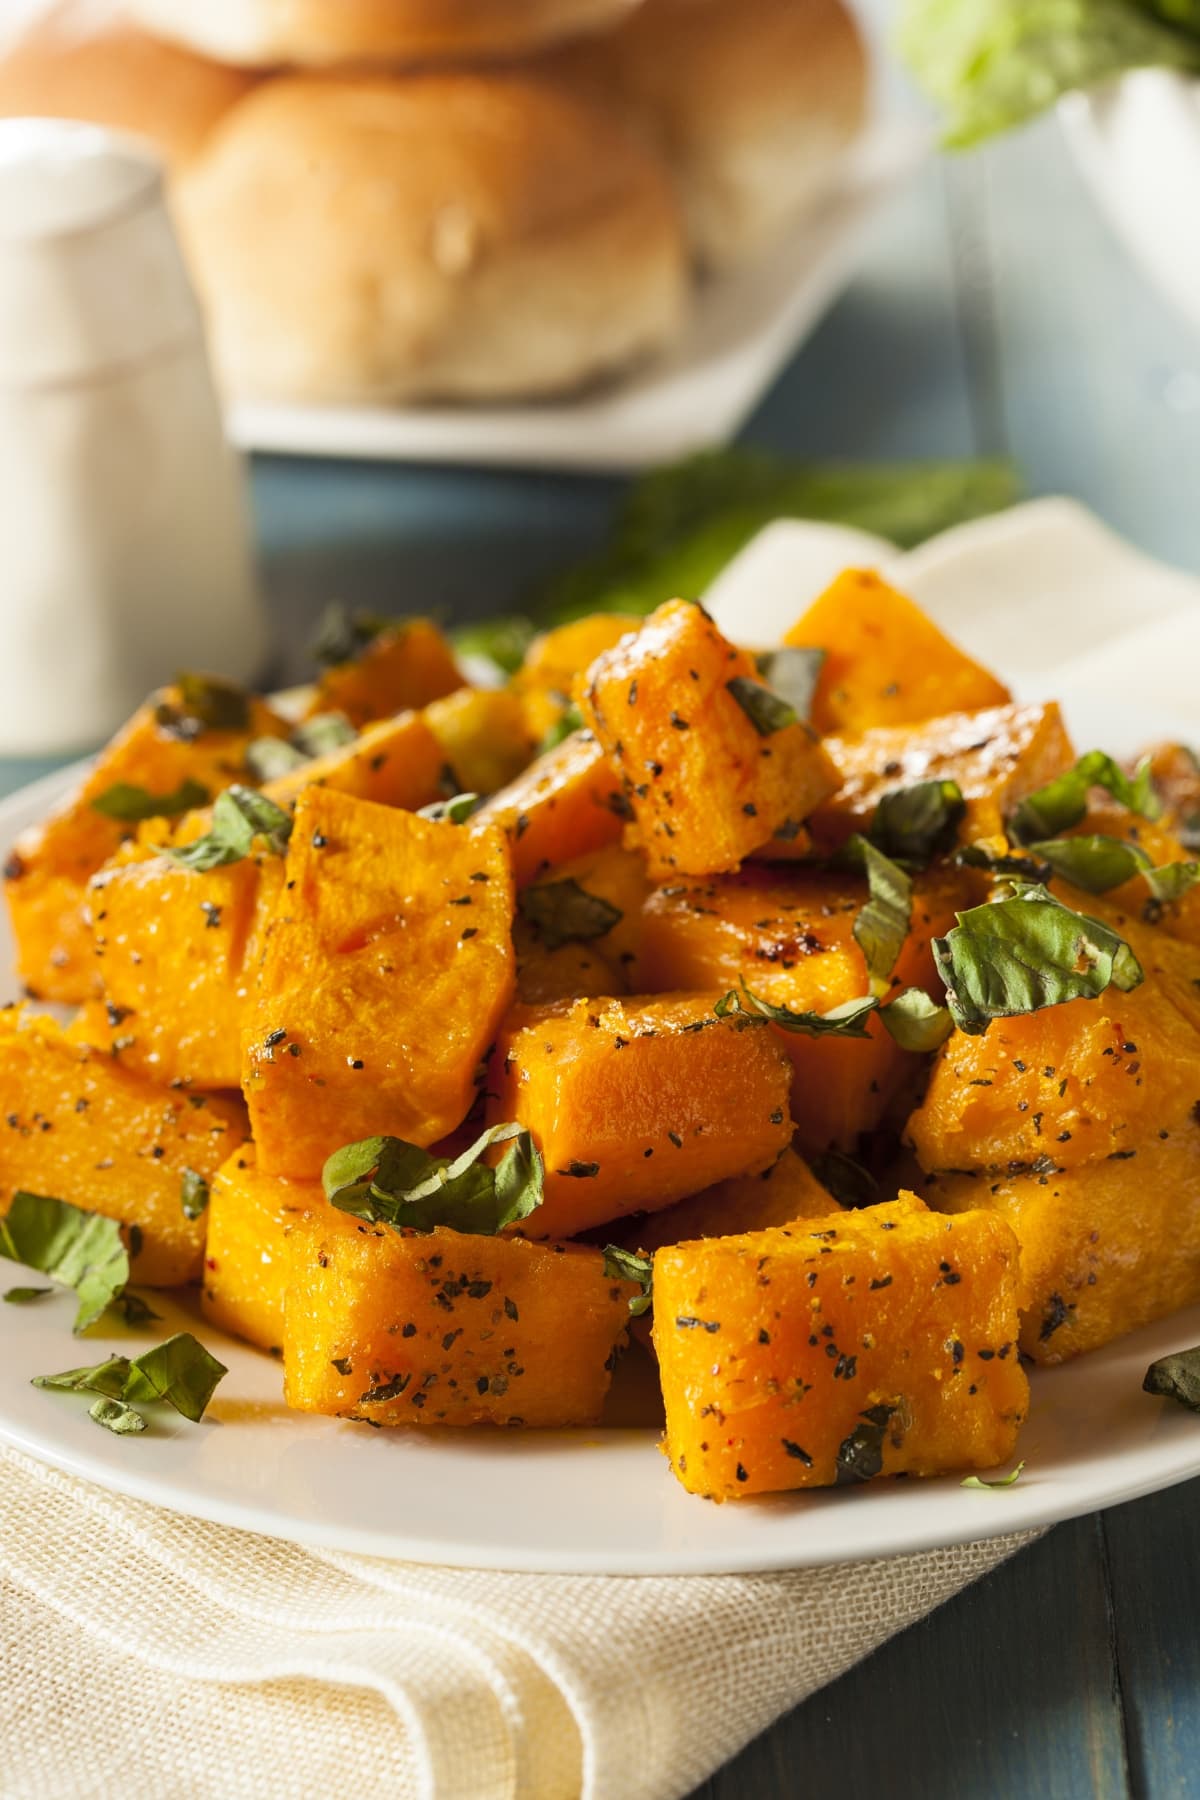 Organic Roasted Butternut Squash with Herbs and Spices